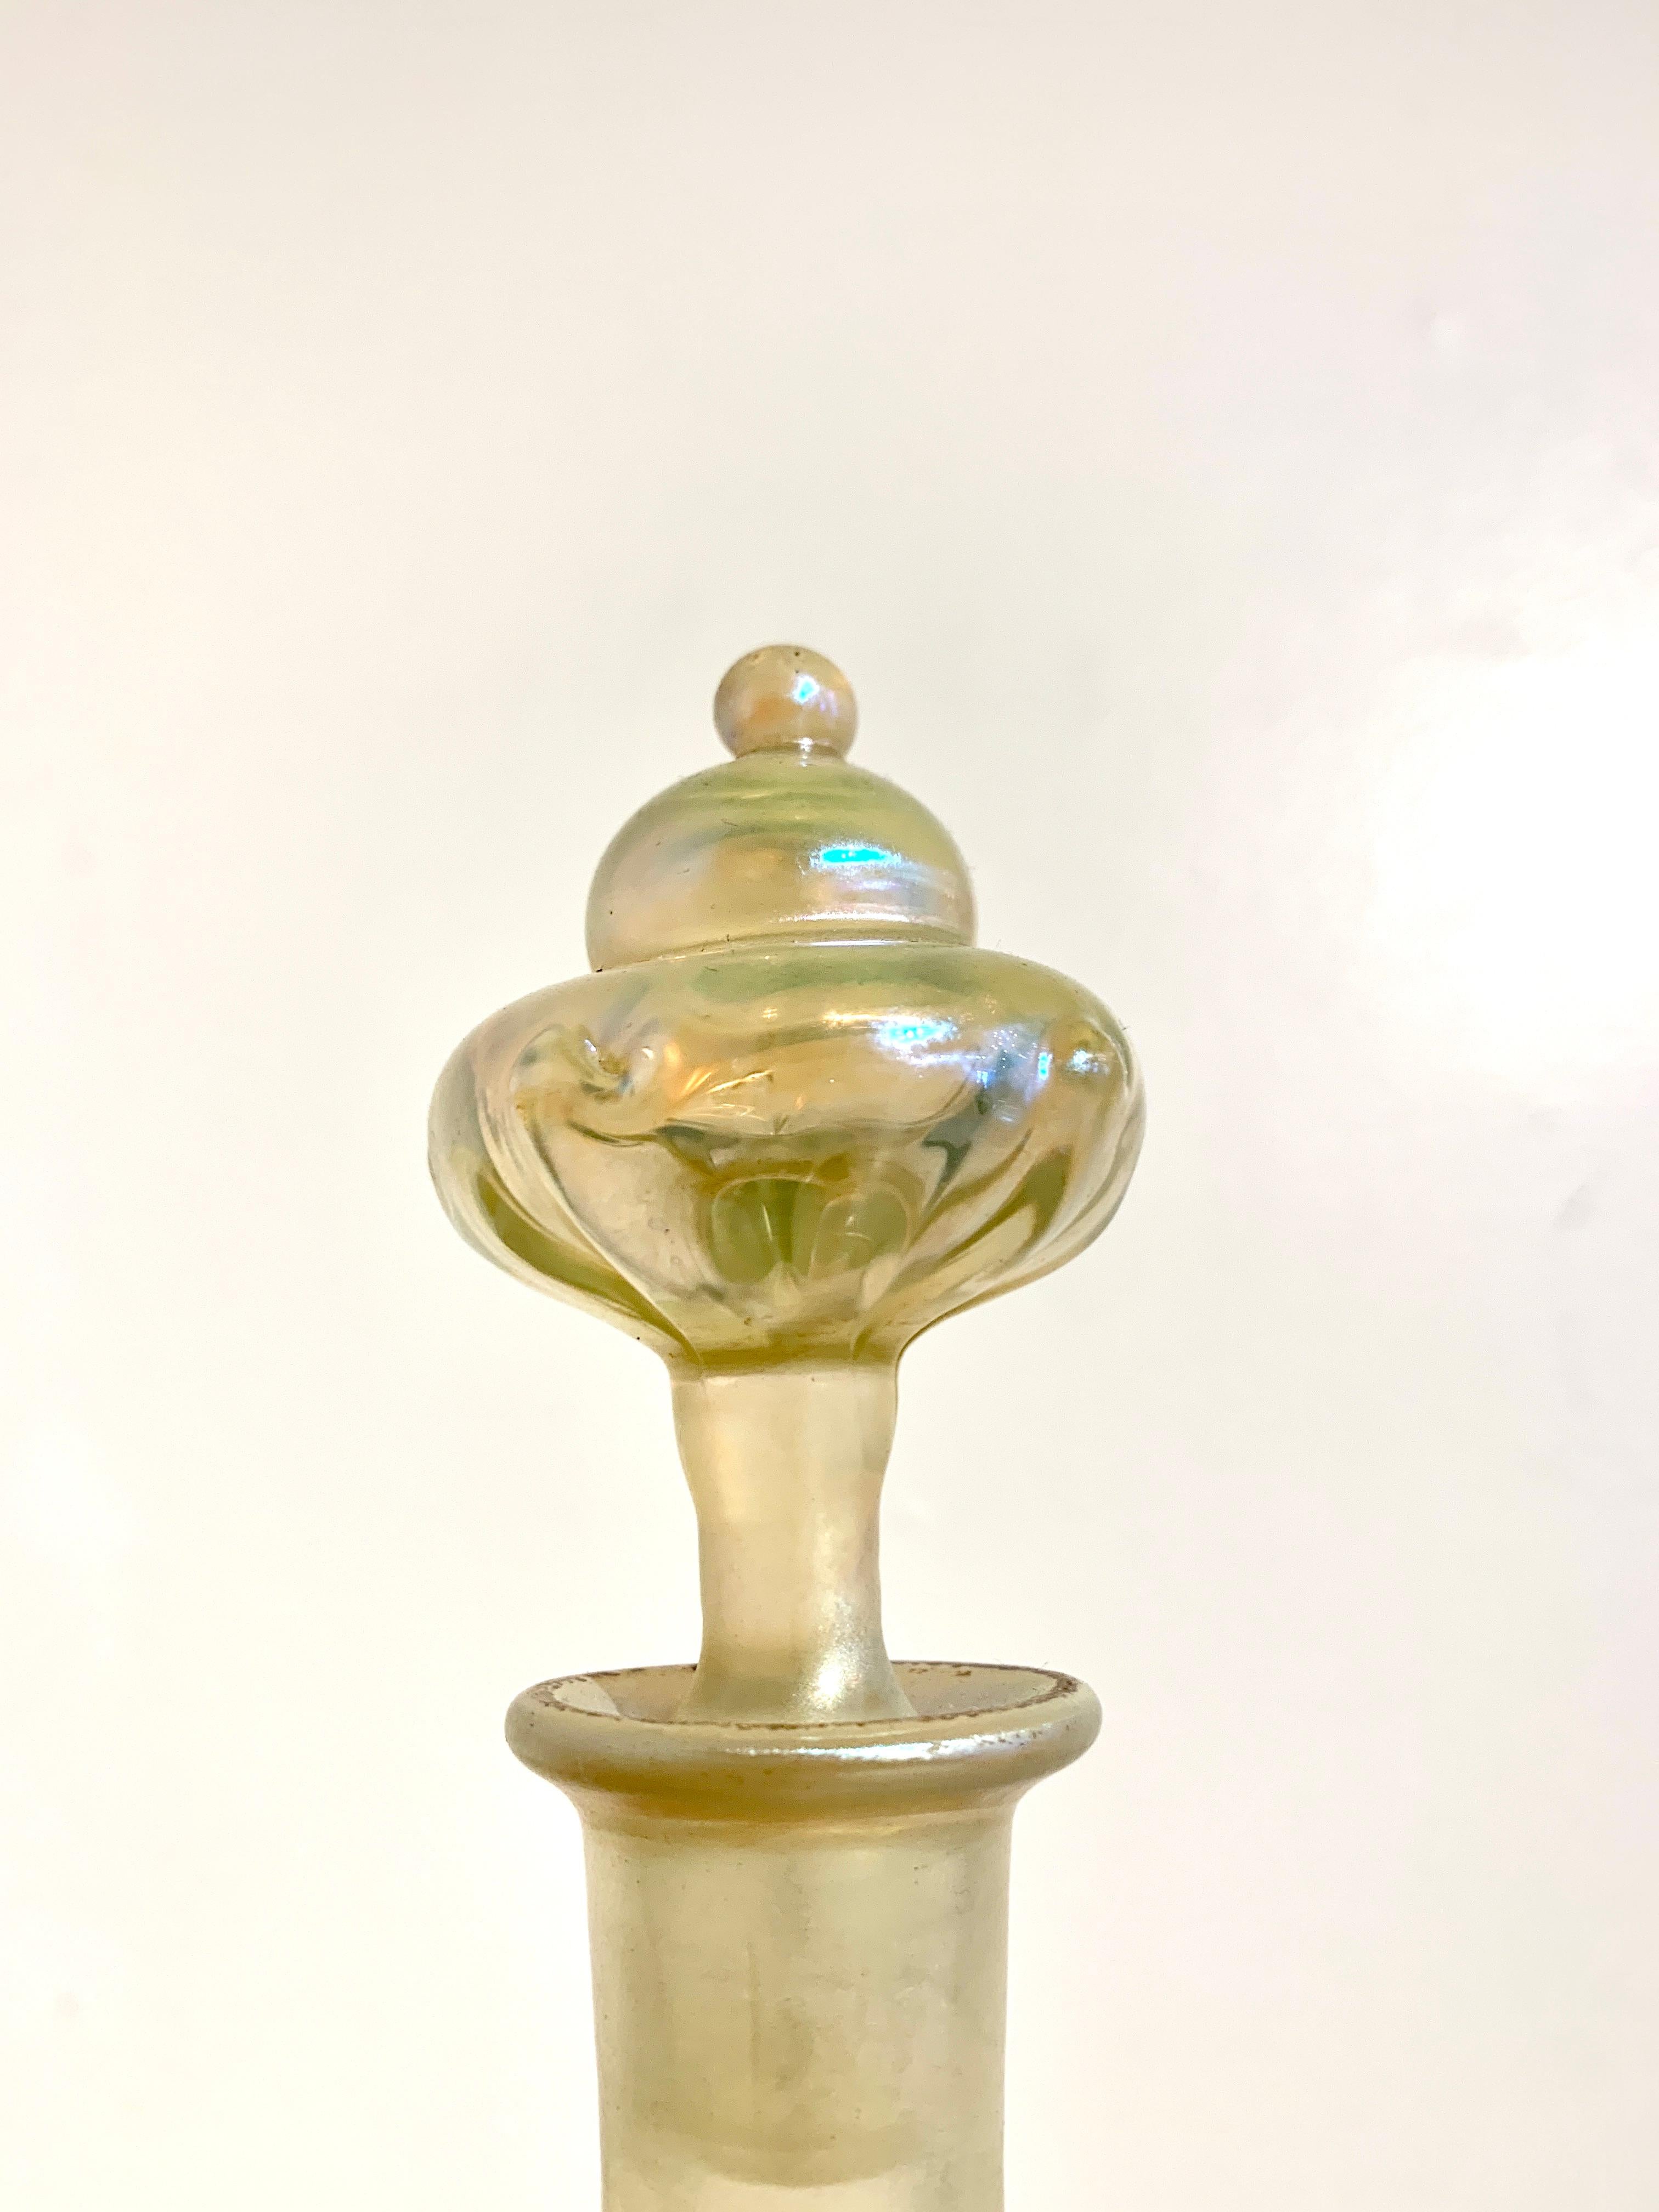 American Tiffany Studios Favrille Glass Pigtail Prunt Decanter, Early 20th Century, USA For Sale